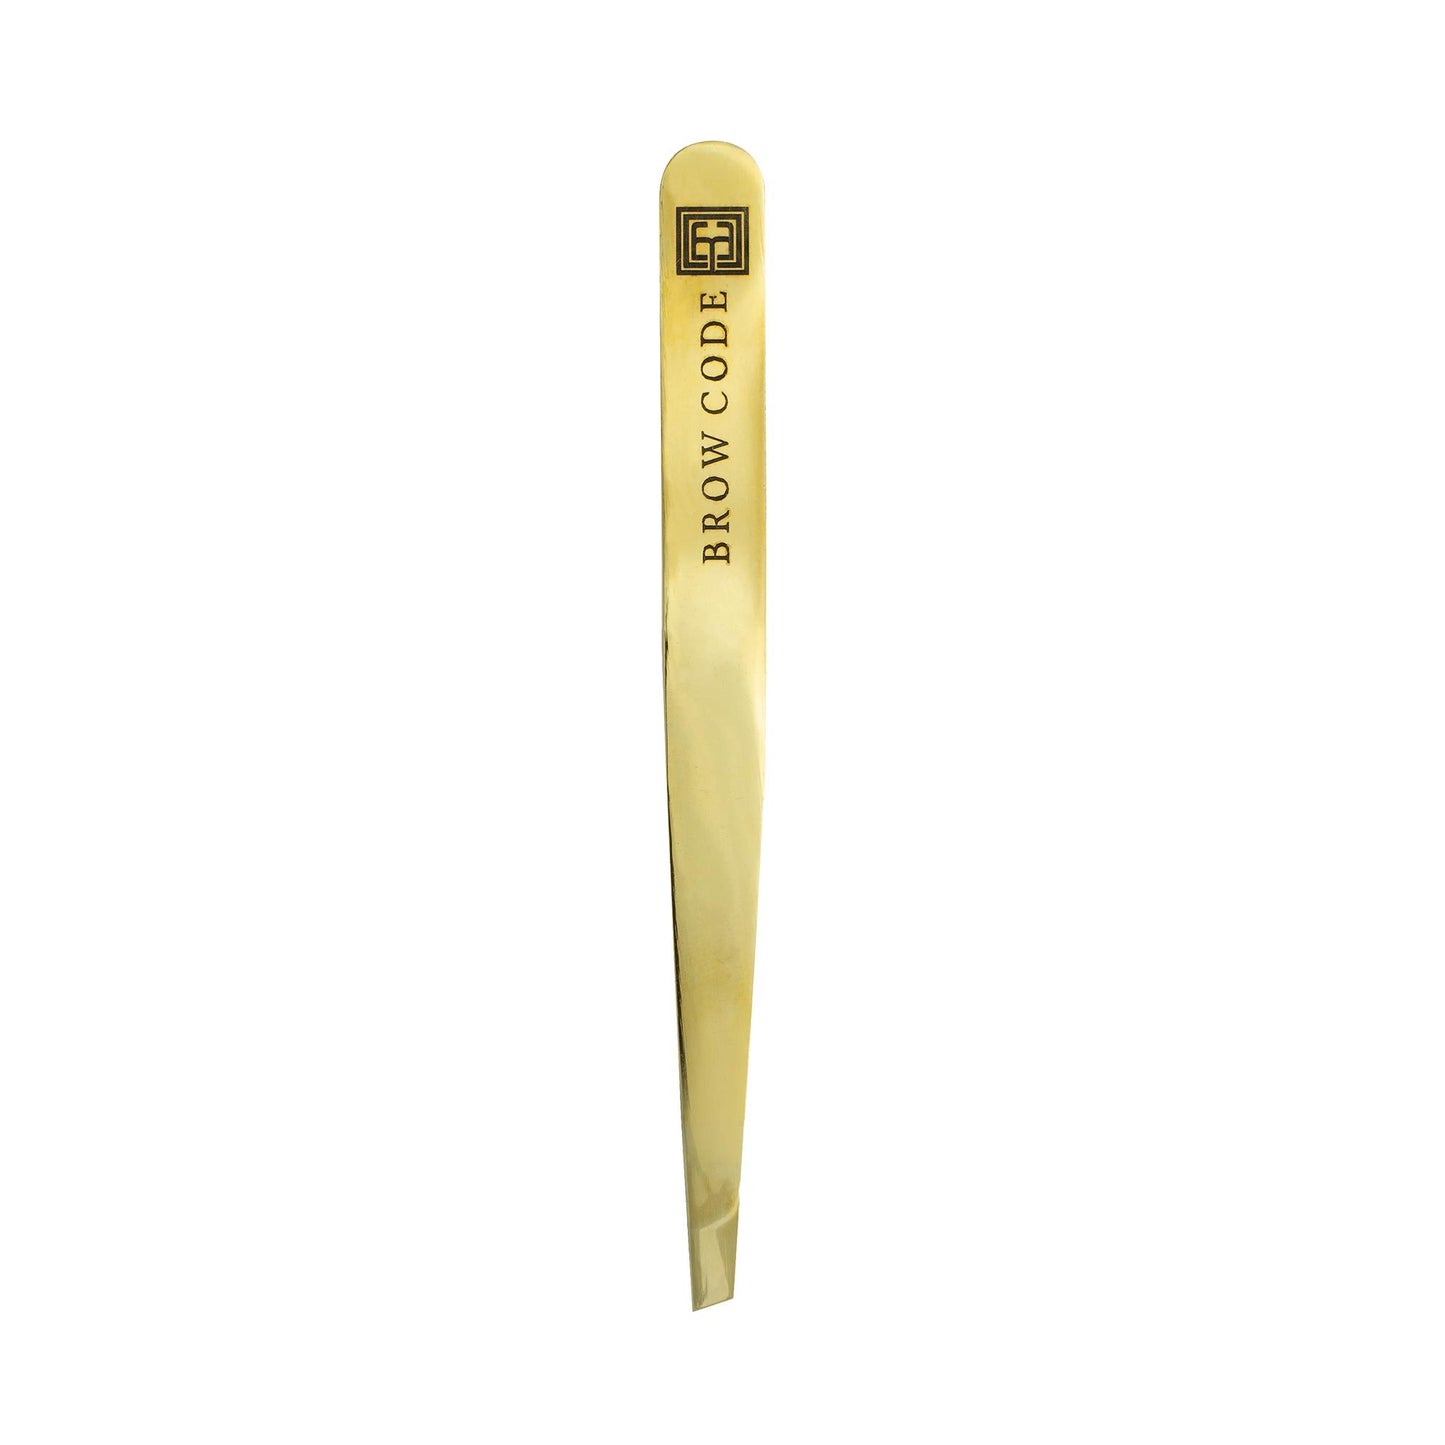 Type-Slant Precision tweezers against a white background